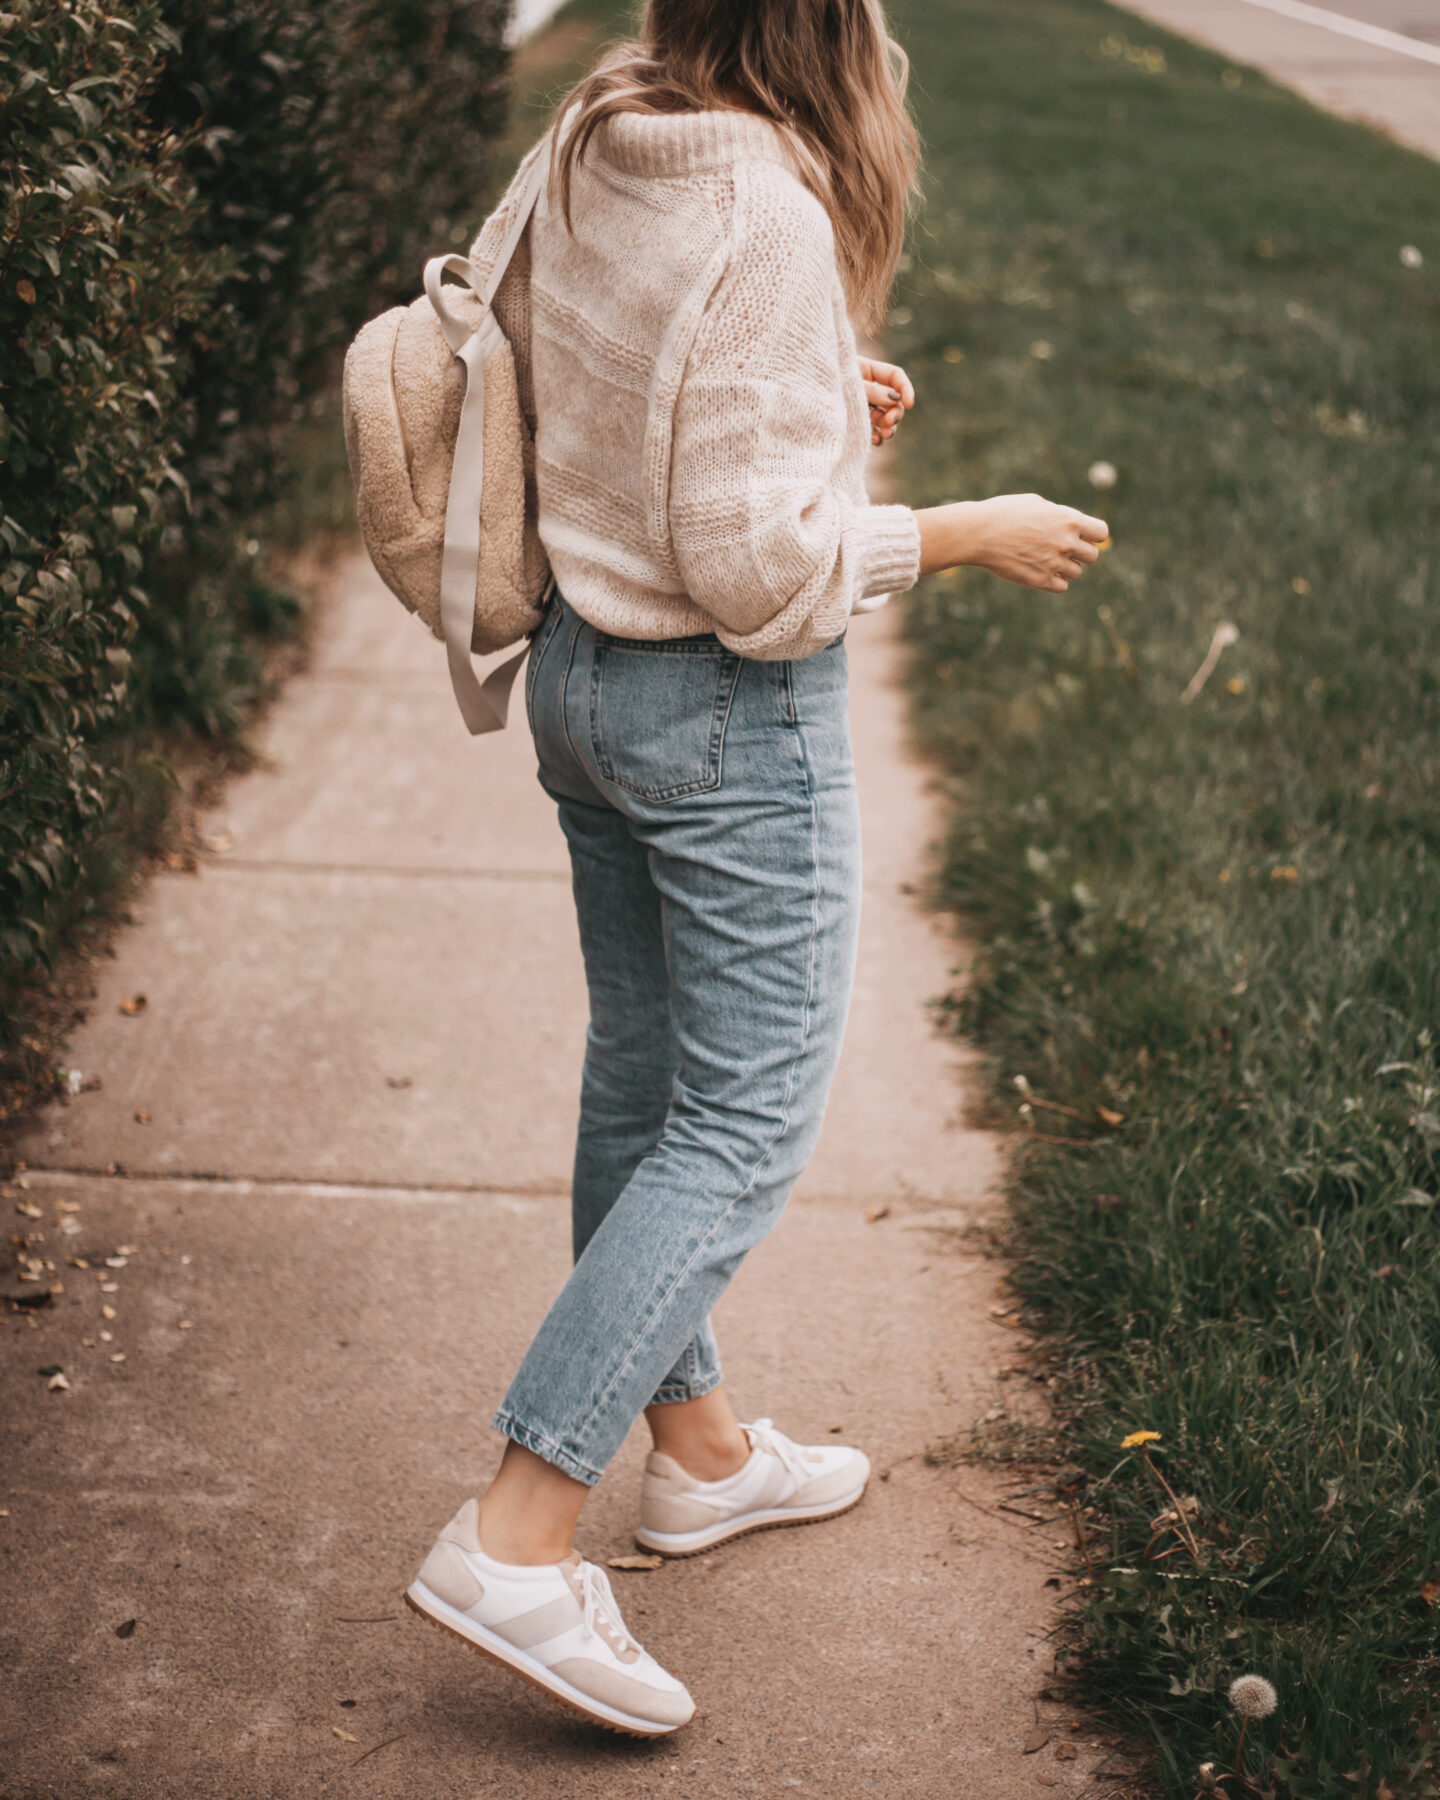 karin emily wears a chunky sweater, light wash jeans, and neutral sneakers